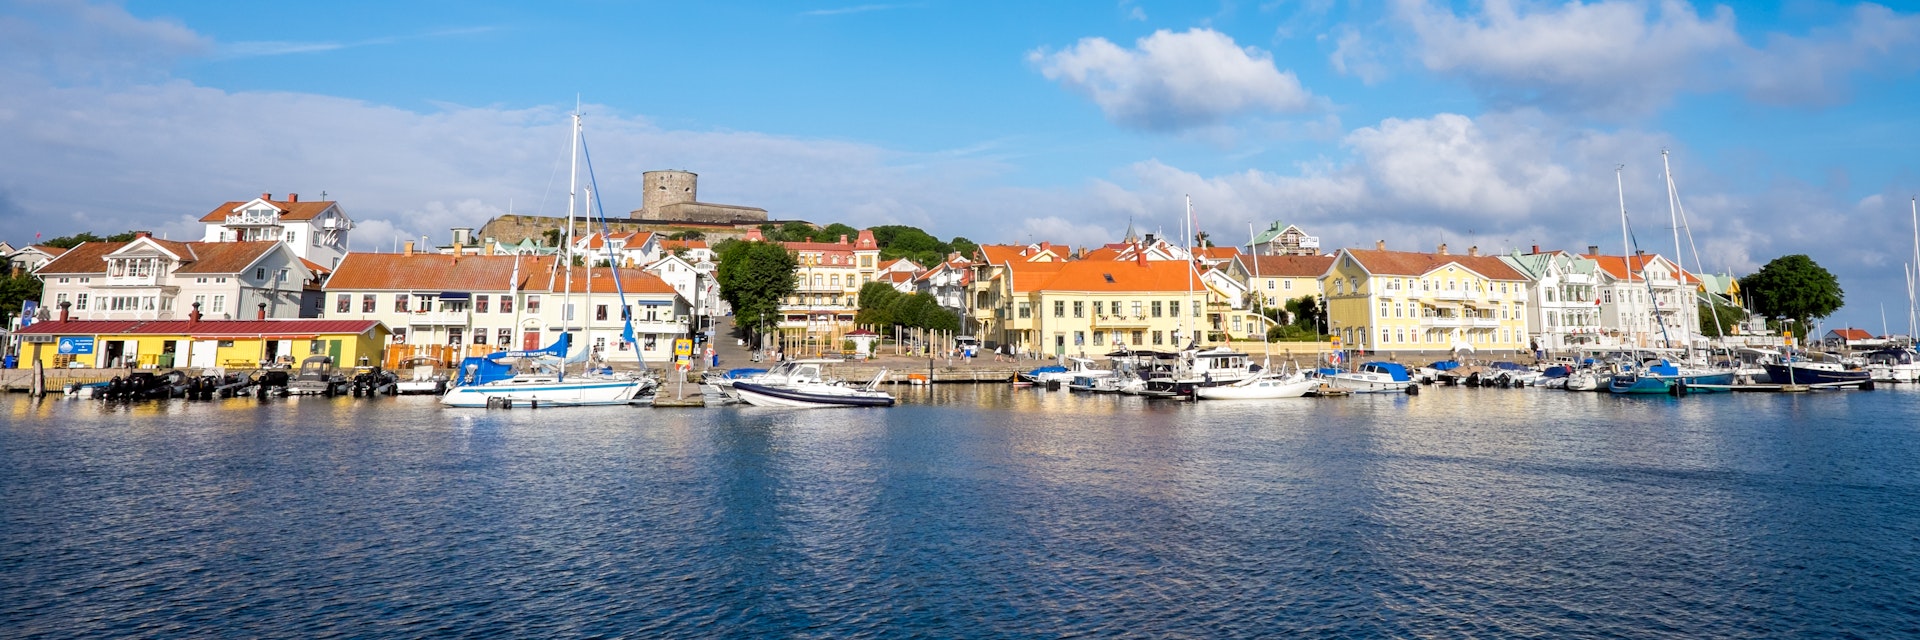 MARSTRAND, SWEDEN  JULY 4:  Tranquil sunny summer morning on July 4, 2014 in Marstrand. Located on two islands north of Gothenburg Marstrand is a fishing village and a popular tourist destination.; Shutterstock ID 203821174; Your name (First / Last): Josh Vogel; Project no. or GL code: 56530; Network activity no. or Cost Centre: Online-Design; Product or Project: 65050/7529/Josh Vogel/LP.com Destination Galleries